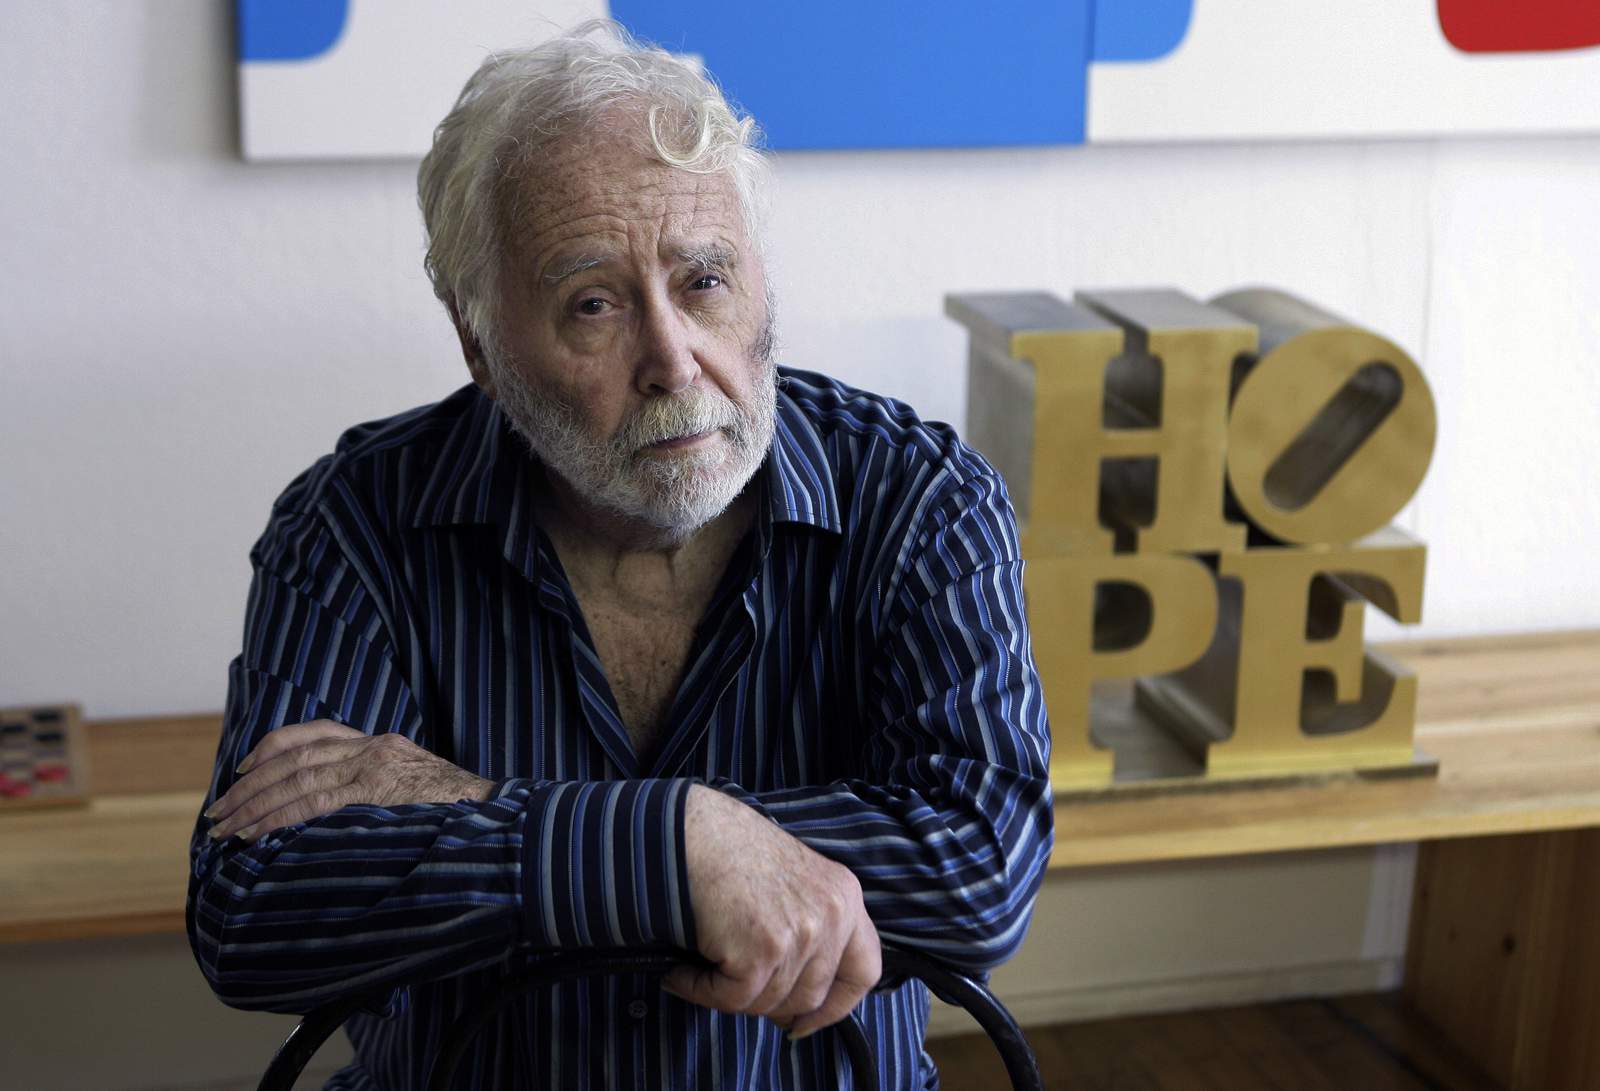 Agreement could free Robert Indiana's estate from lawsuit